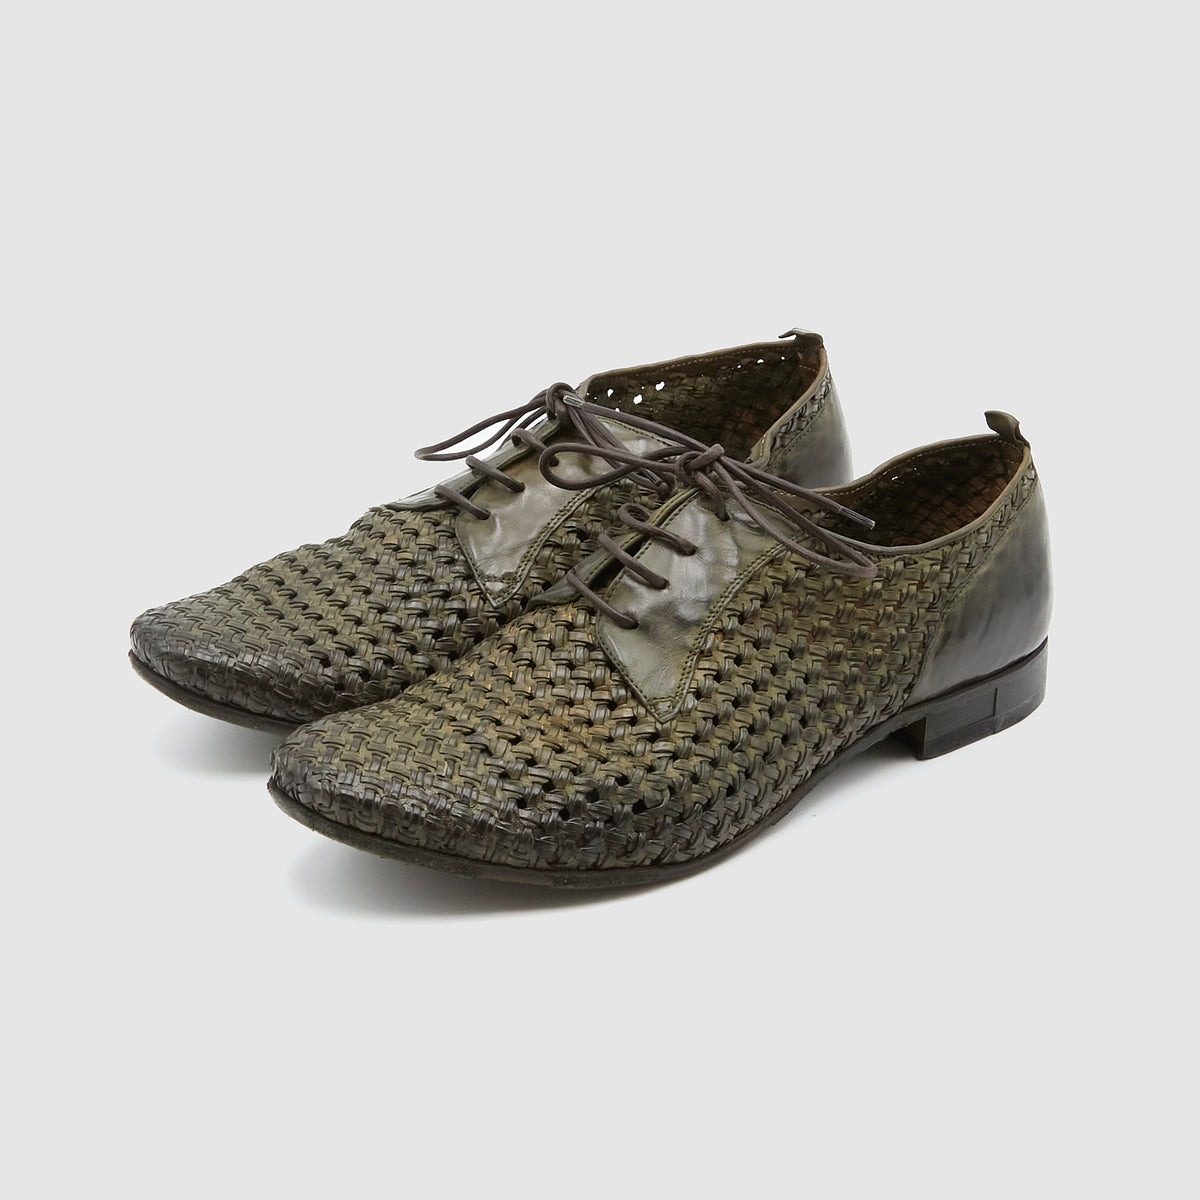 Silvano Sassetti Braided Leather Oxford Shoes